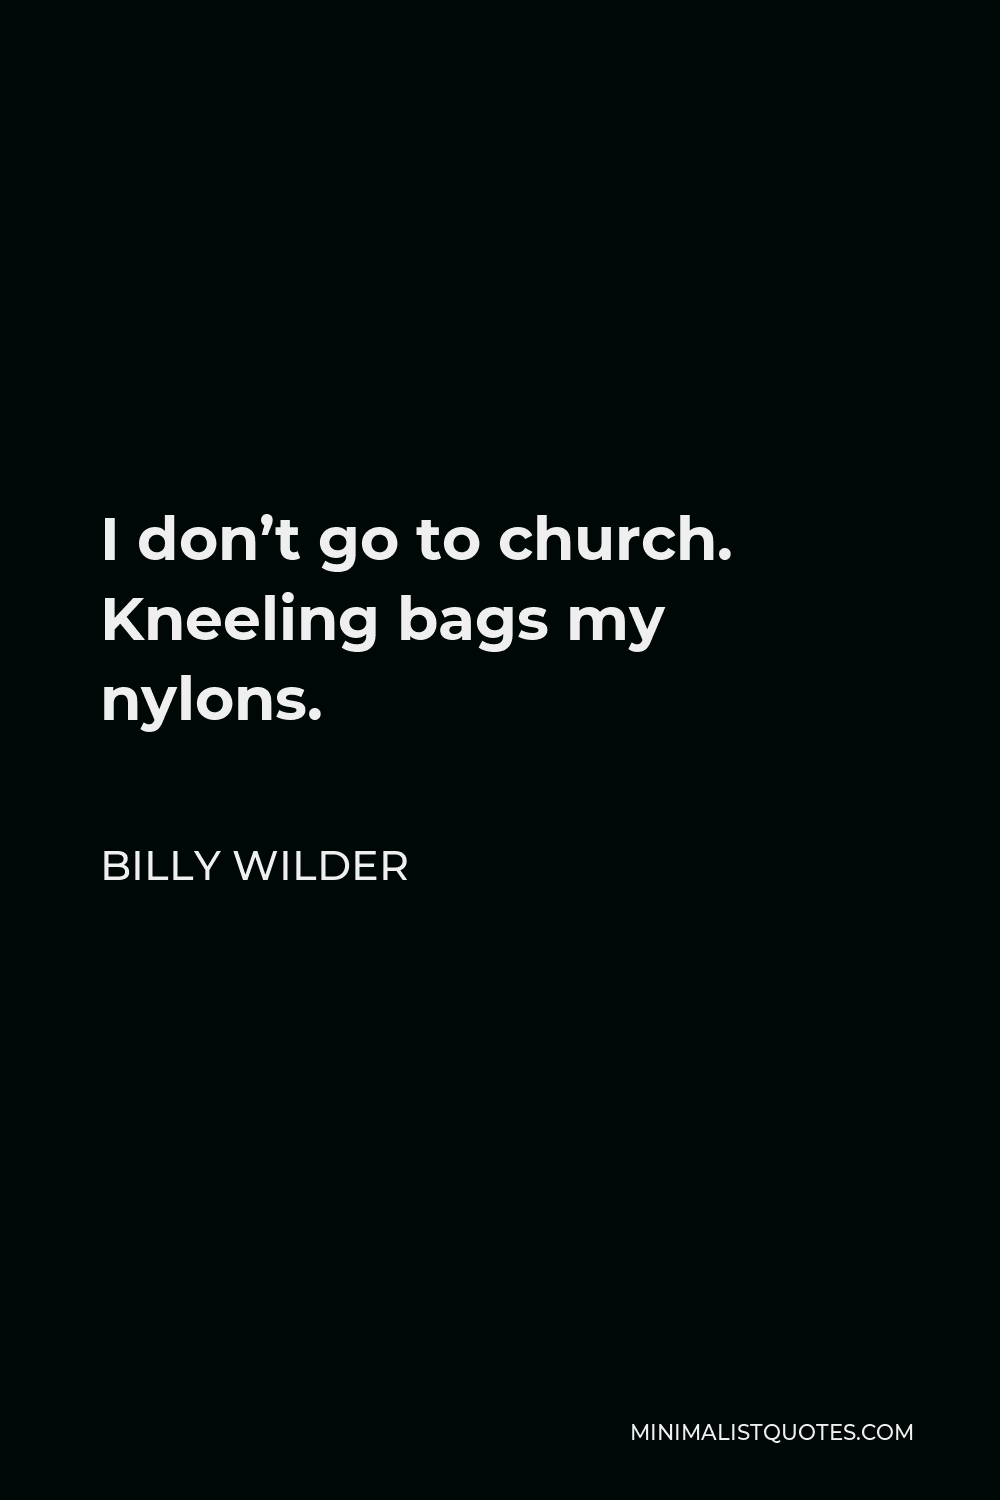 Billy Wilder Quote - I don’t go to church. Kneeling bags my nylons.